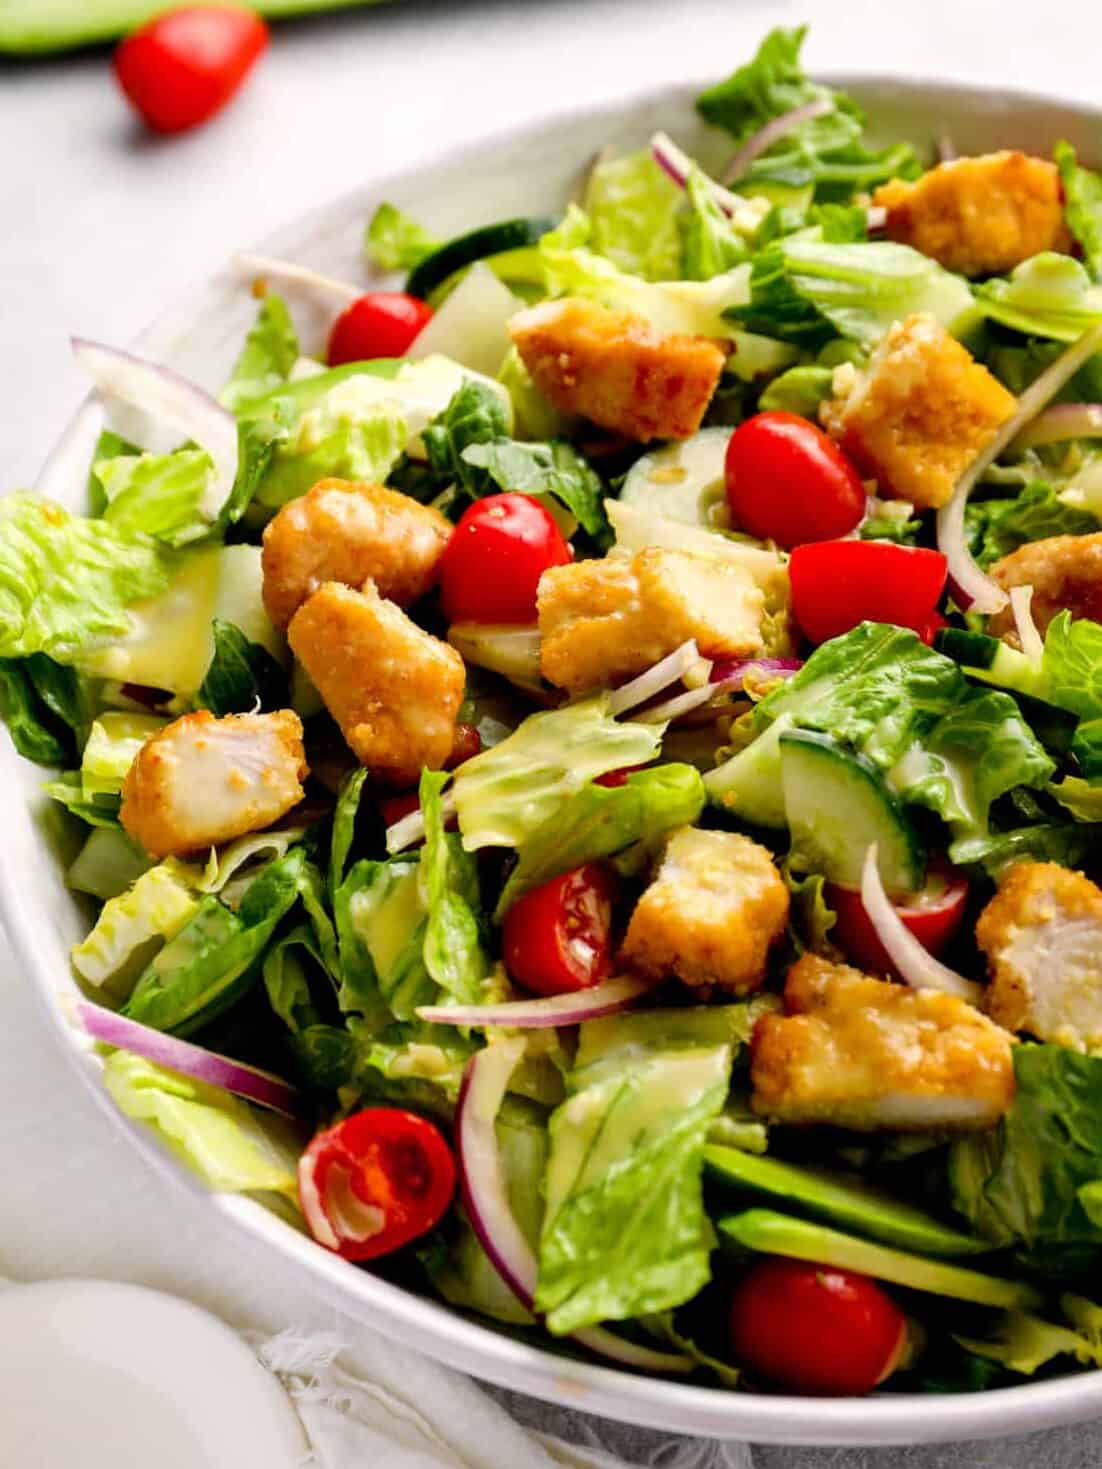 salad tossed with tomatoes, onions, croutons, and more